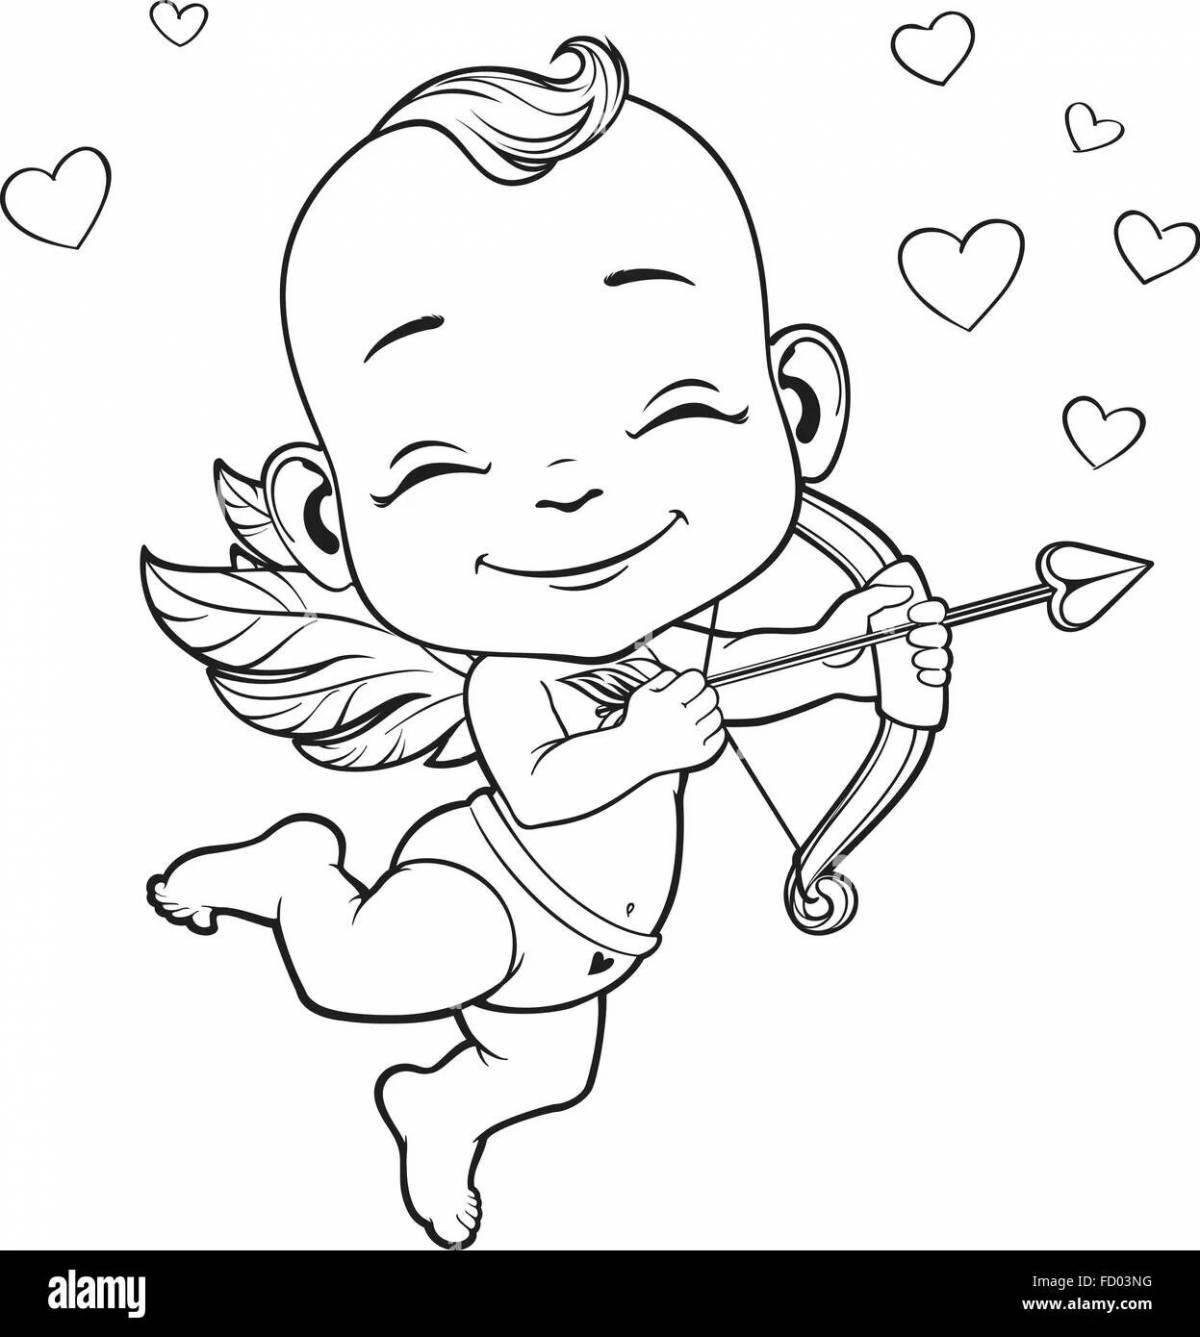 Playful cupid with heart coloring book